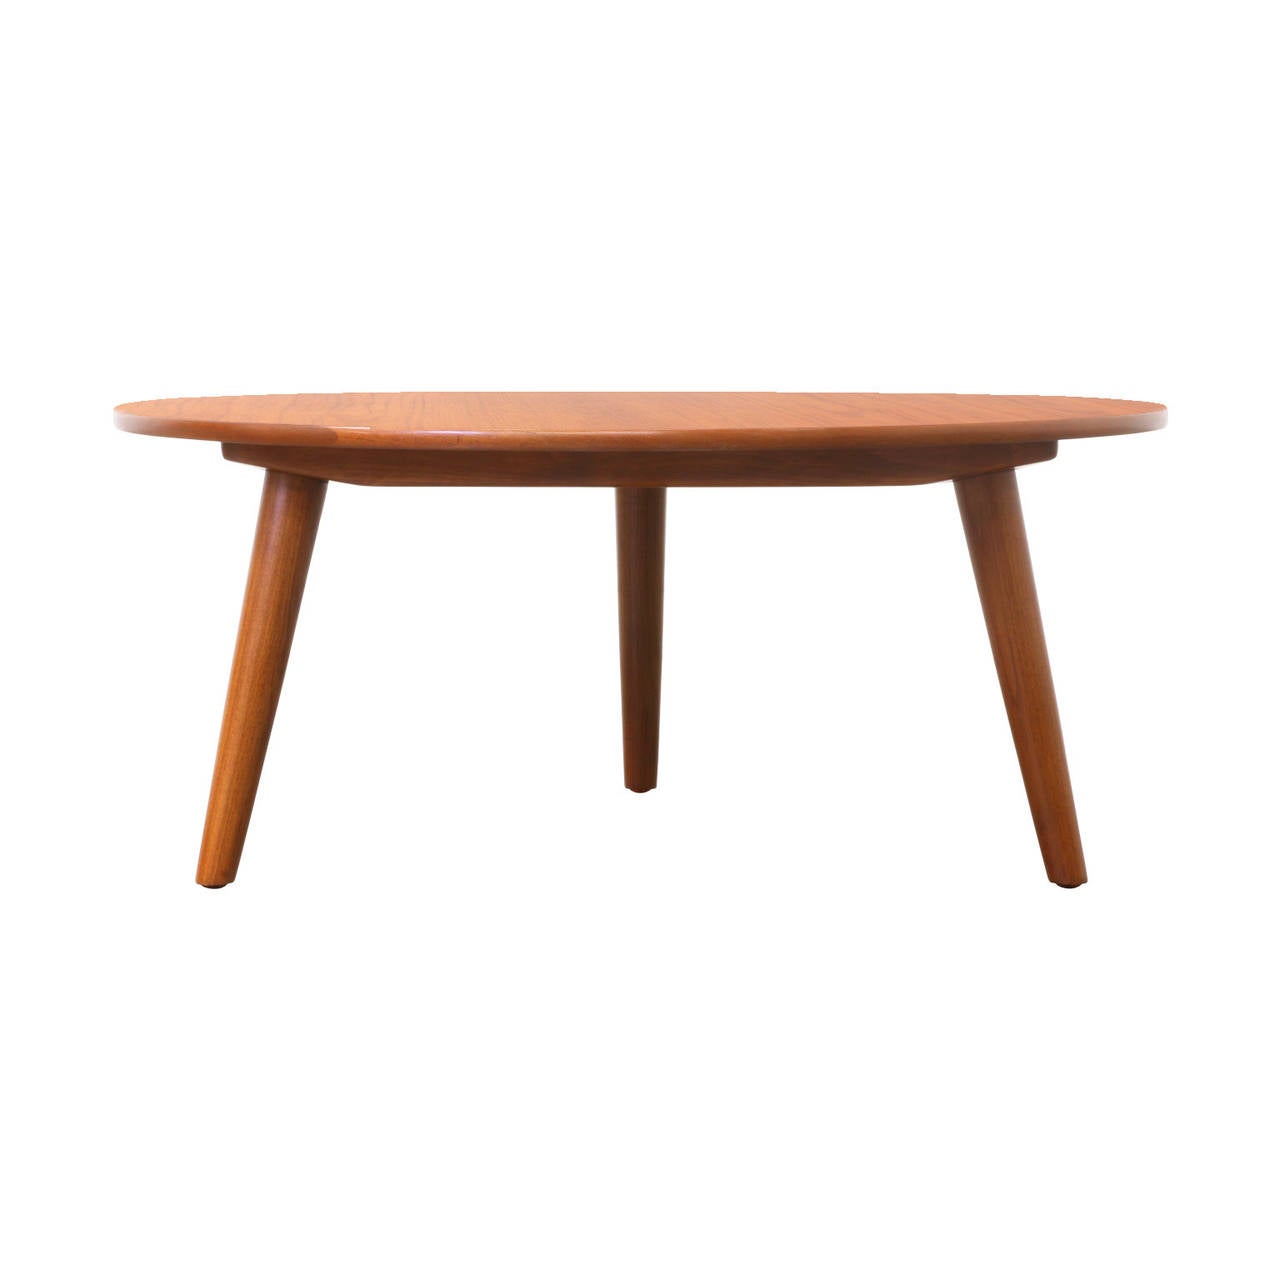 Designer: Hans J. Wegner
Manufacturer: Andreas Tuck
Period/Style: Danish Modern
Country: Denmark 
Date: 1950’s

Dimensions: 16.75″H x 38.5″W
Materials: Teak
Condition: Excellent – Newly Refinished
Number of Items: 1
ID Number: